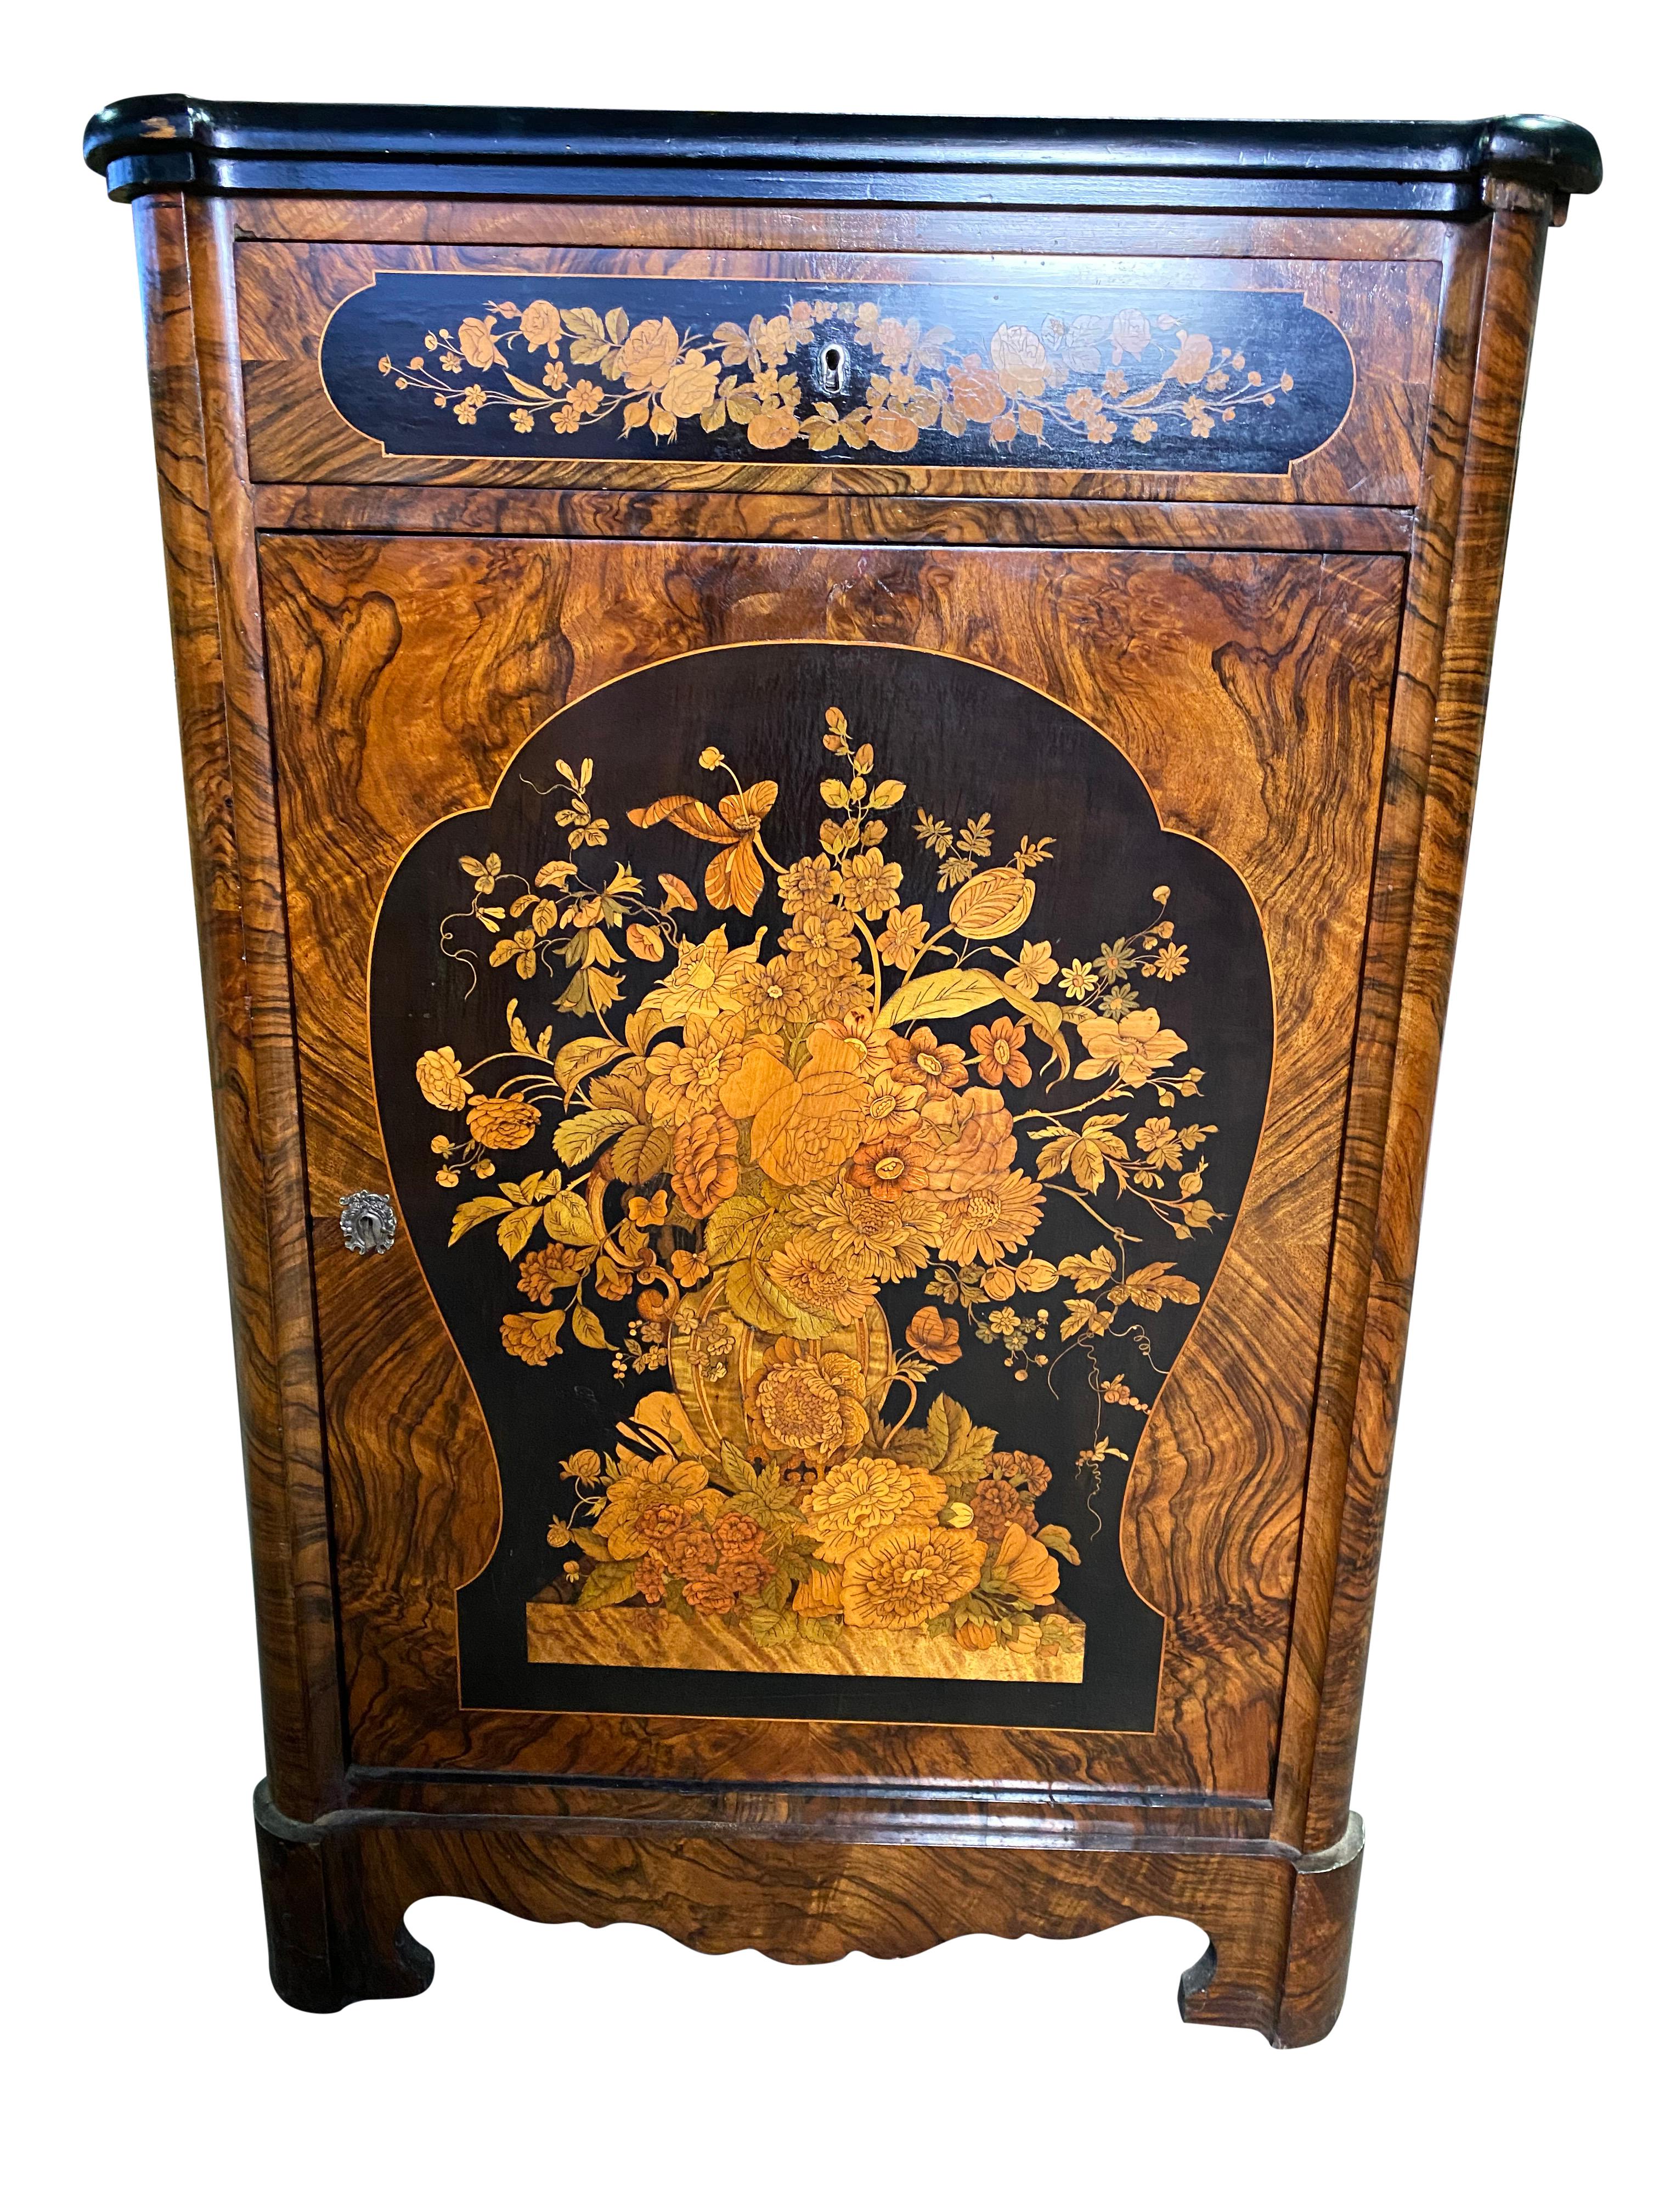 Beautiful 19th century Victorian cabinets with a stunning floral design covering the exterior walnut and satin wood marquetry inlay. Door with lock and key mechanism opens up to a spacious interior as well for a drawer at the top as